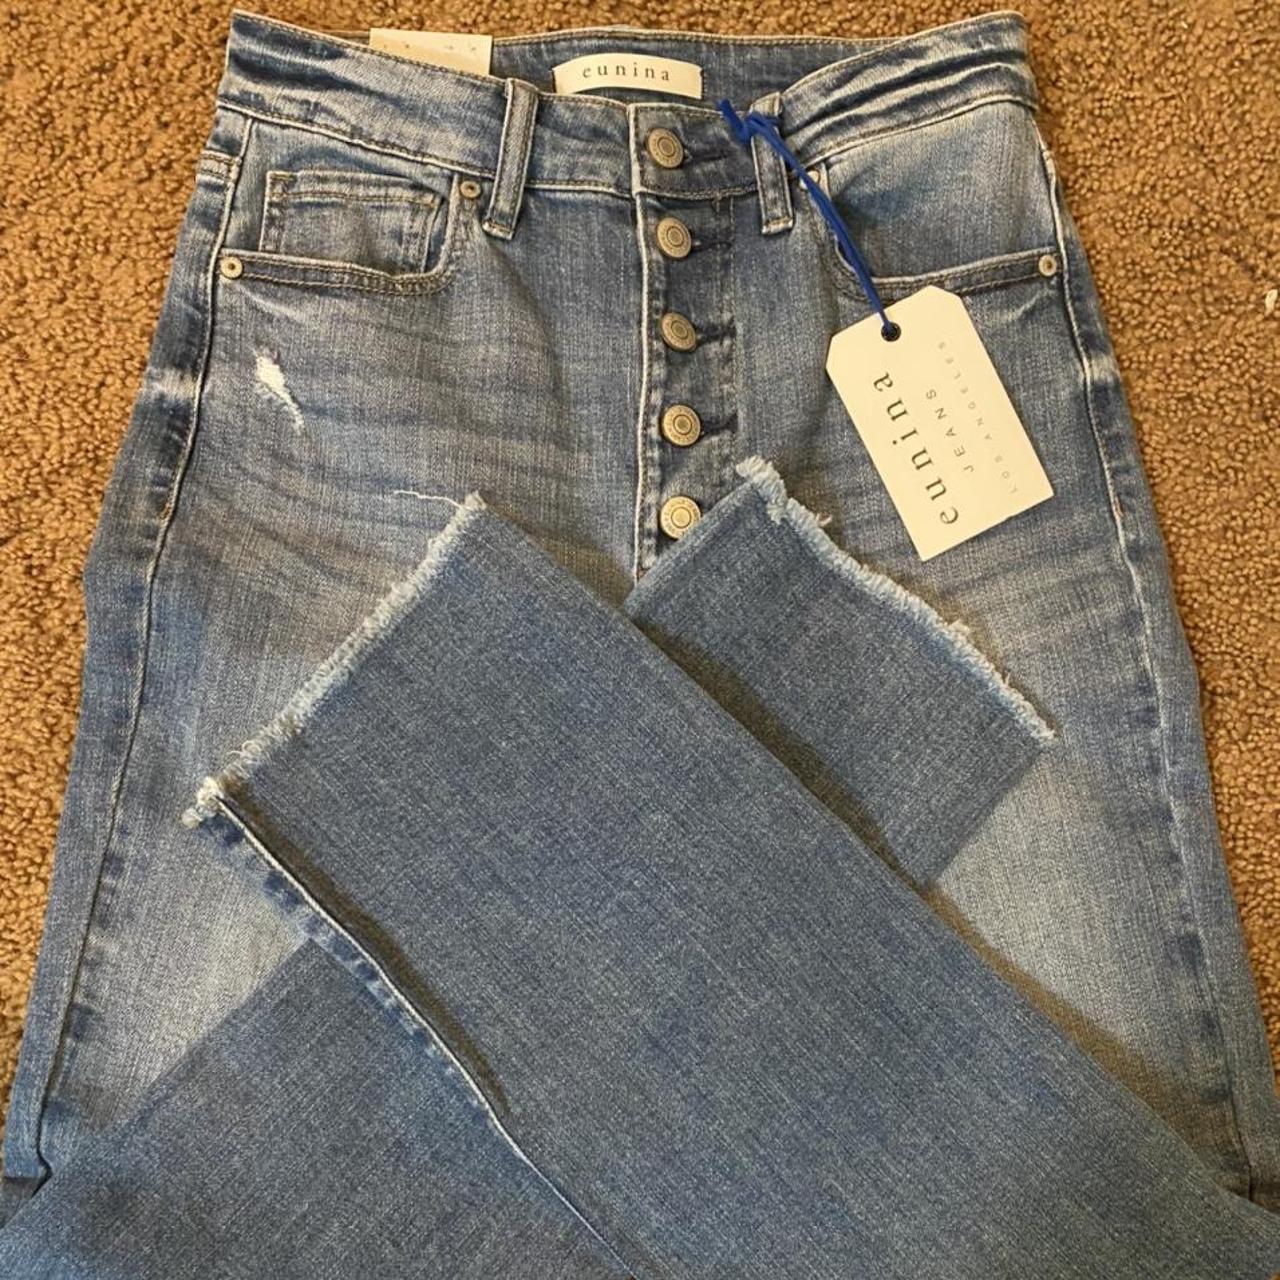 Product Image 2 - Jeans brand new! Bought for